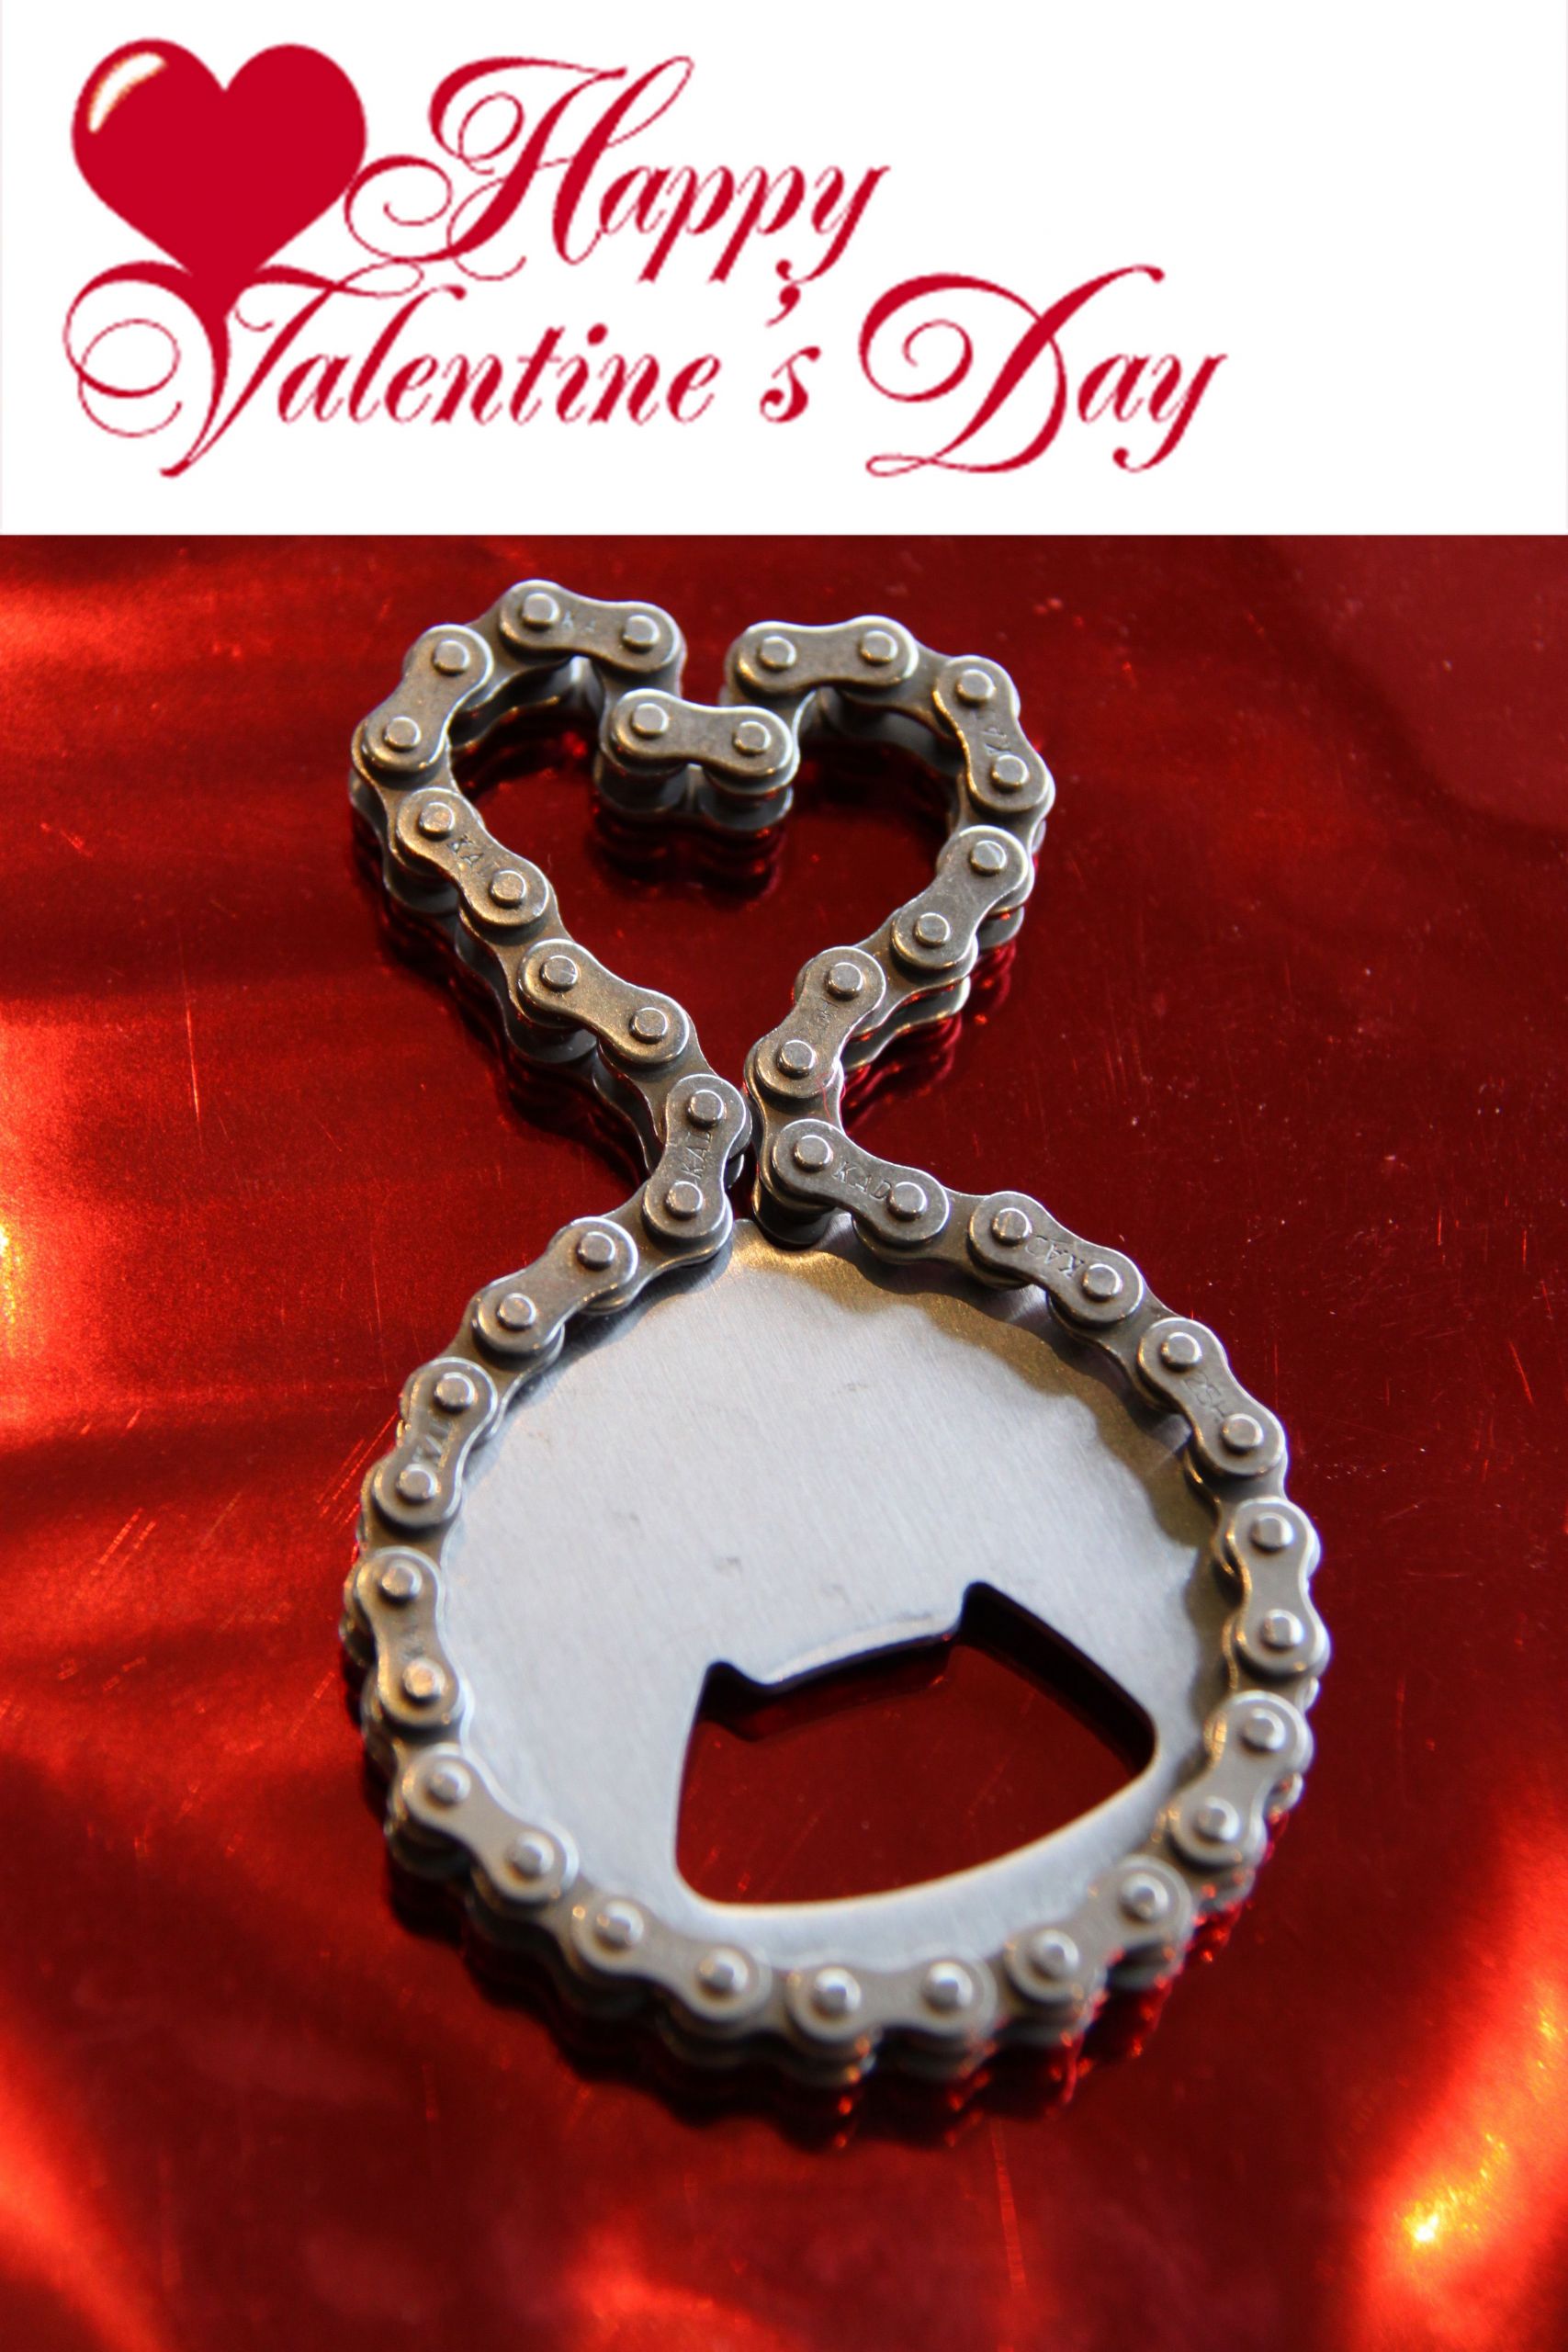 Gift Ideas For Valentines Day Uk
 Valentines Day Gift Ideas from NMM